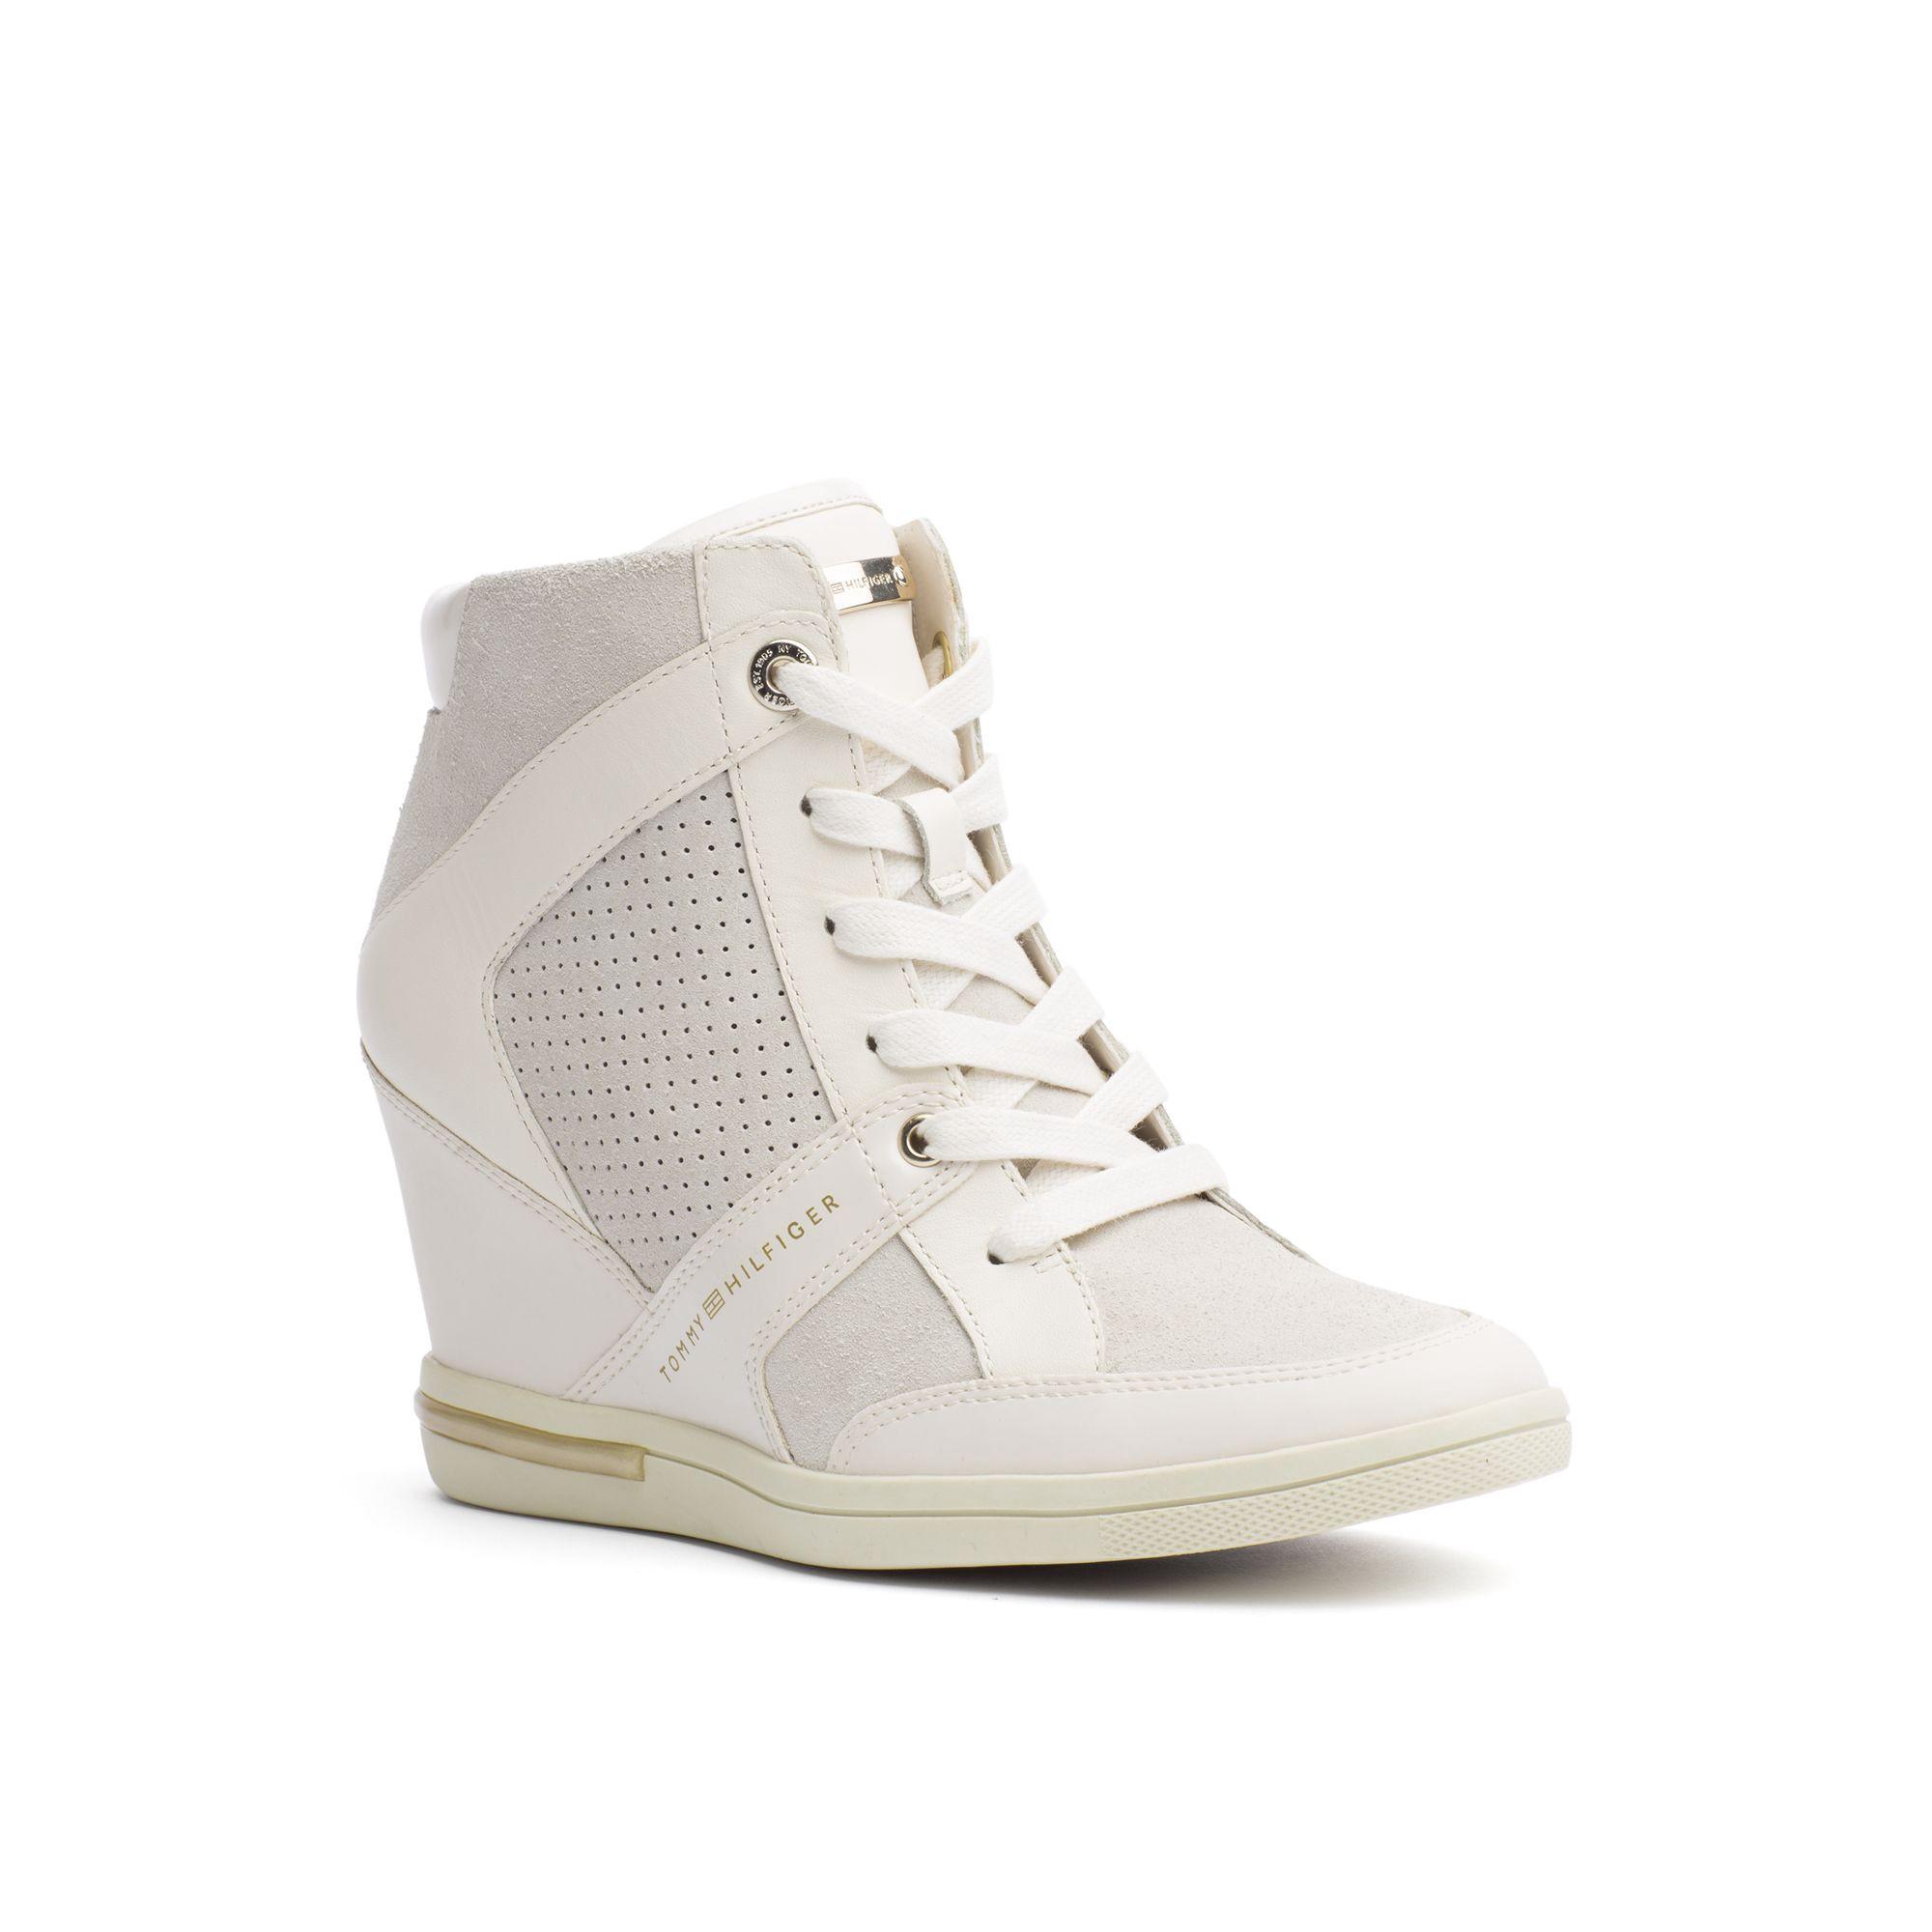 Tommy Hilfiger Suede And Leather Sneaker Wedge - Whisper White | ModeSens